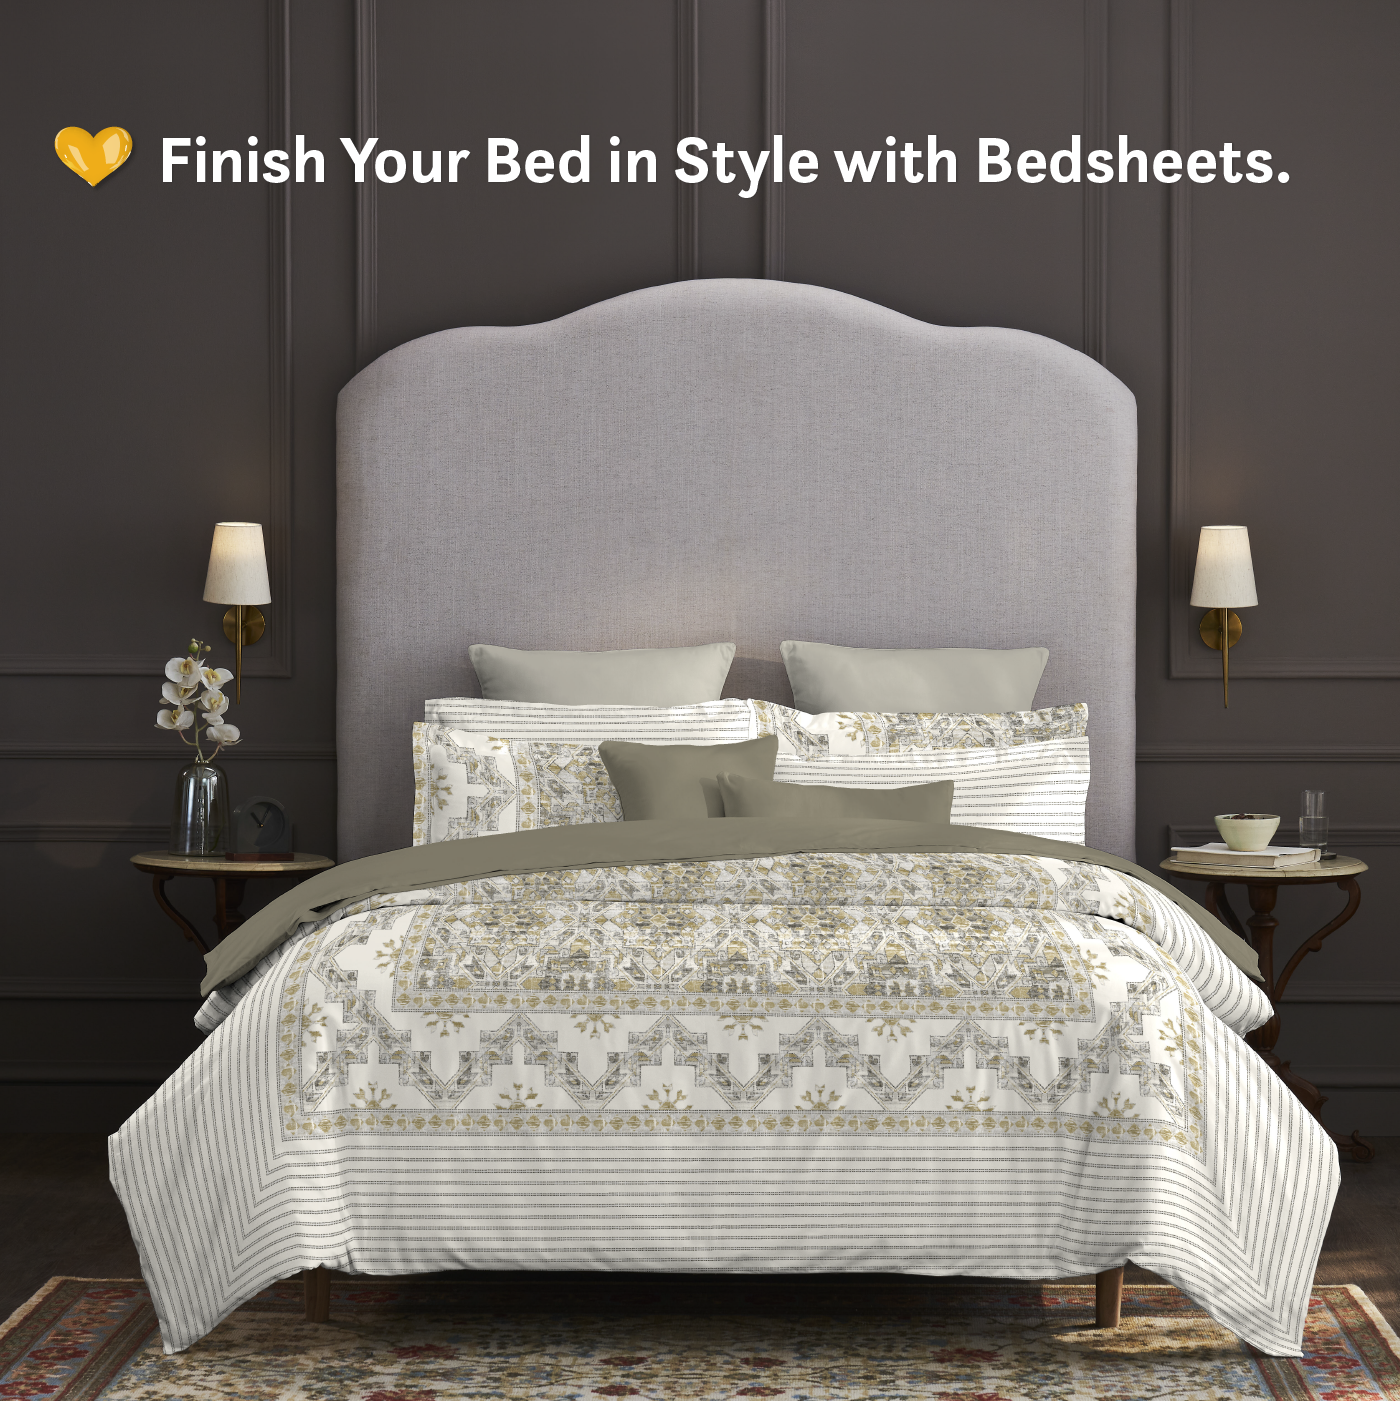 Finish Your Bed in Style With Bedsheets